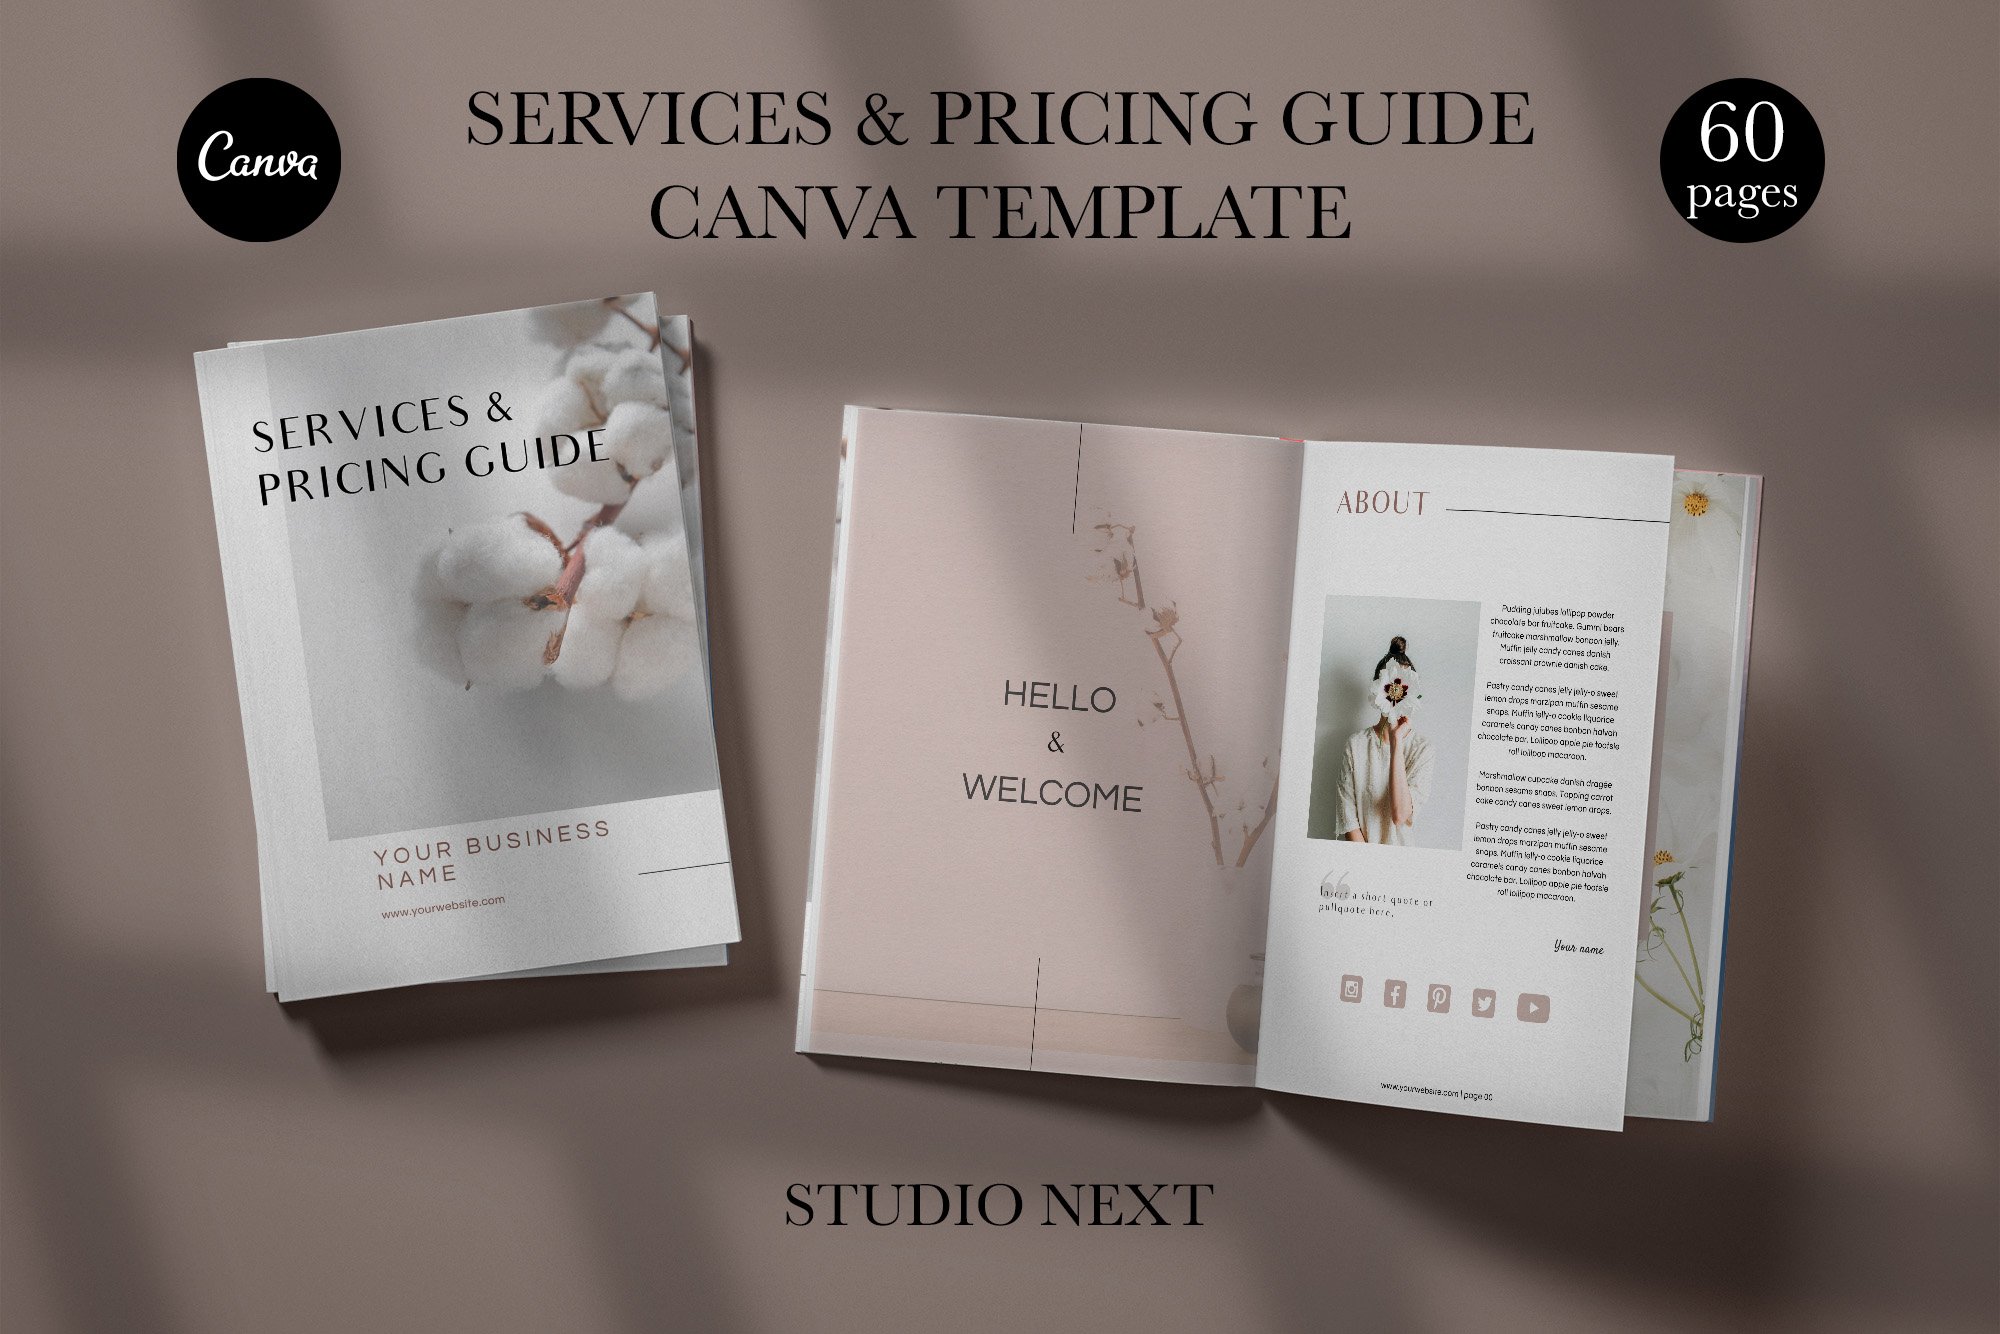 Services & Pricing Template | JANE cover image.